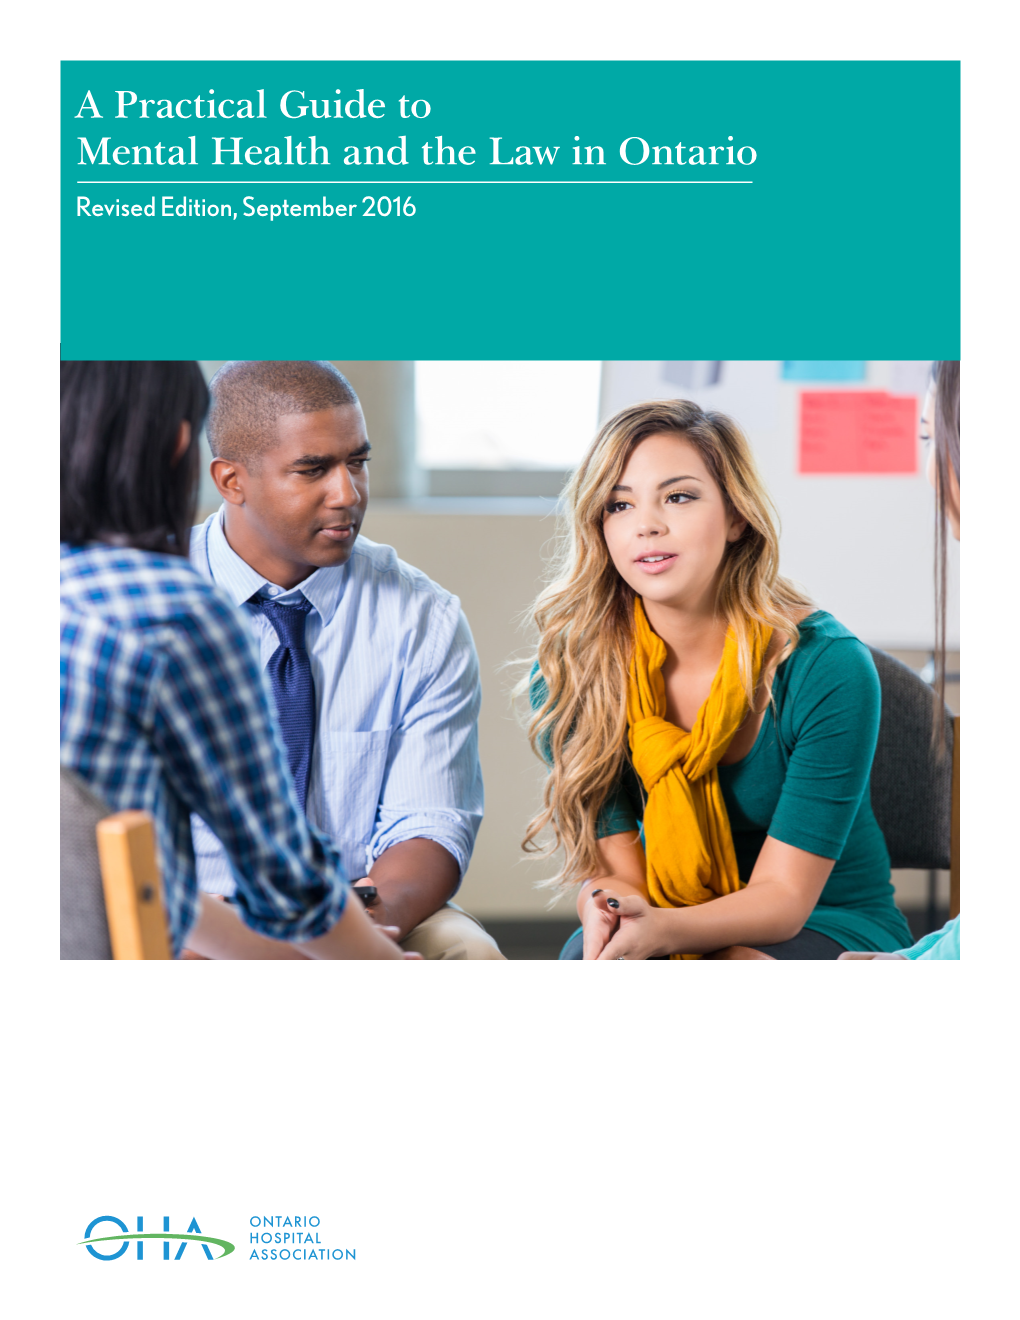 A Practical Guide to Mental Health and the Law in Ontario